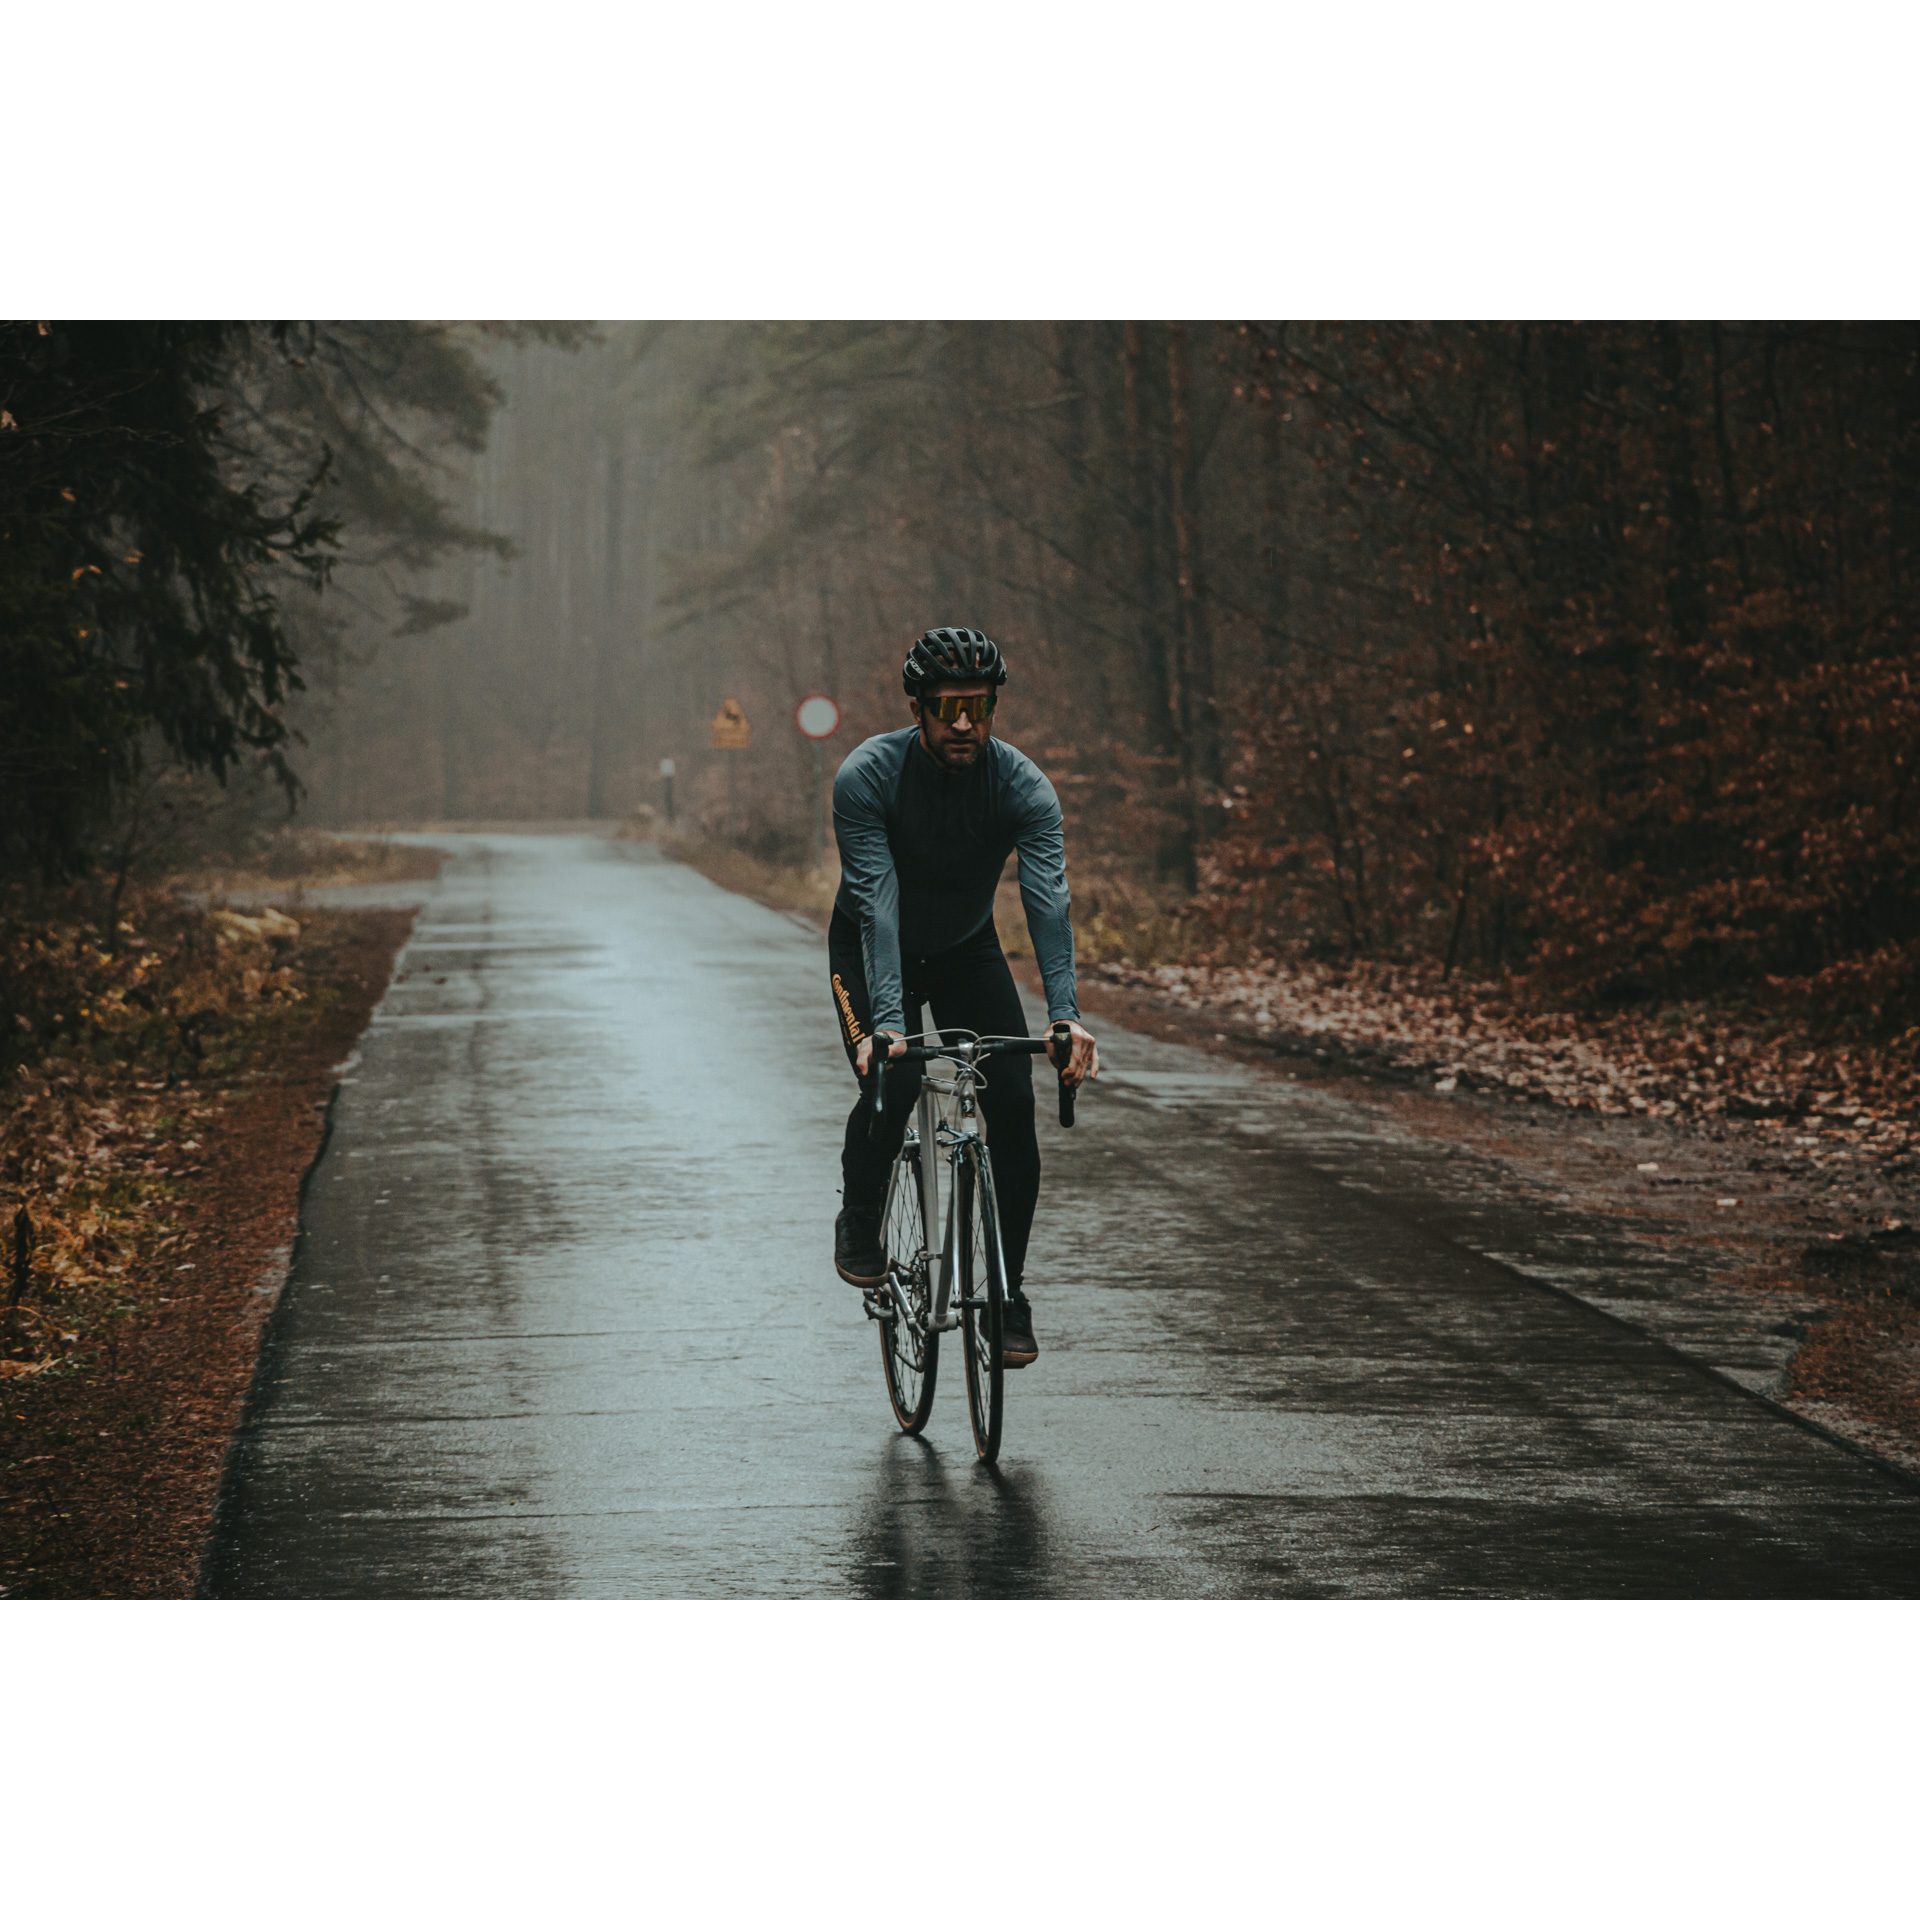 A cyclist in a gray and black outfit and a helmet riding a bicycle on a forest, wet, asphalt road